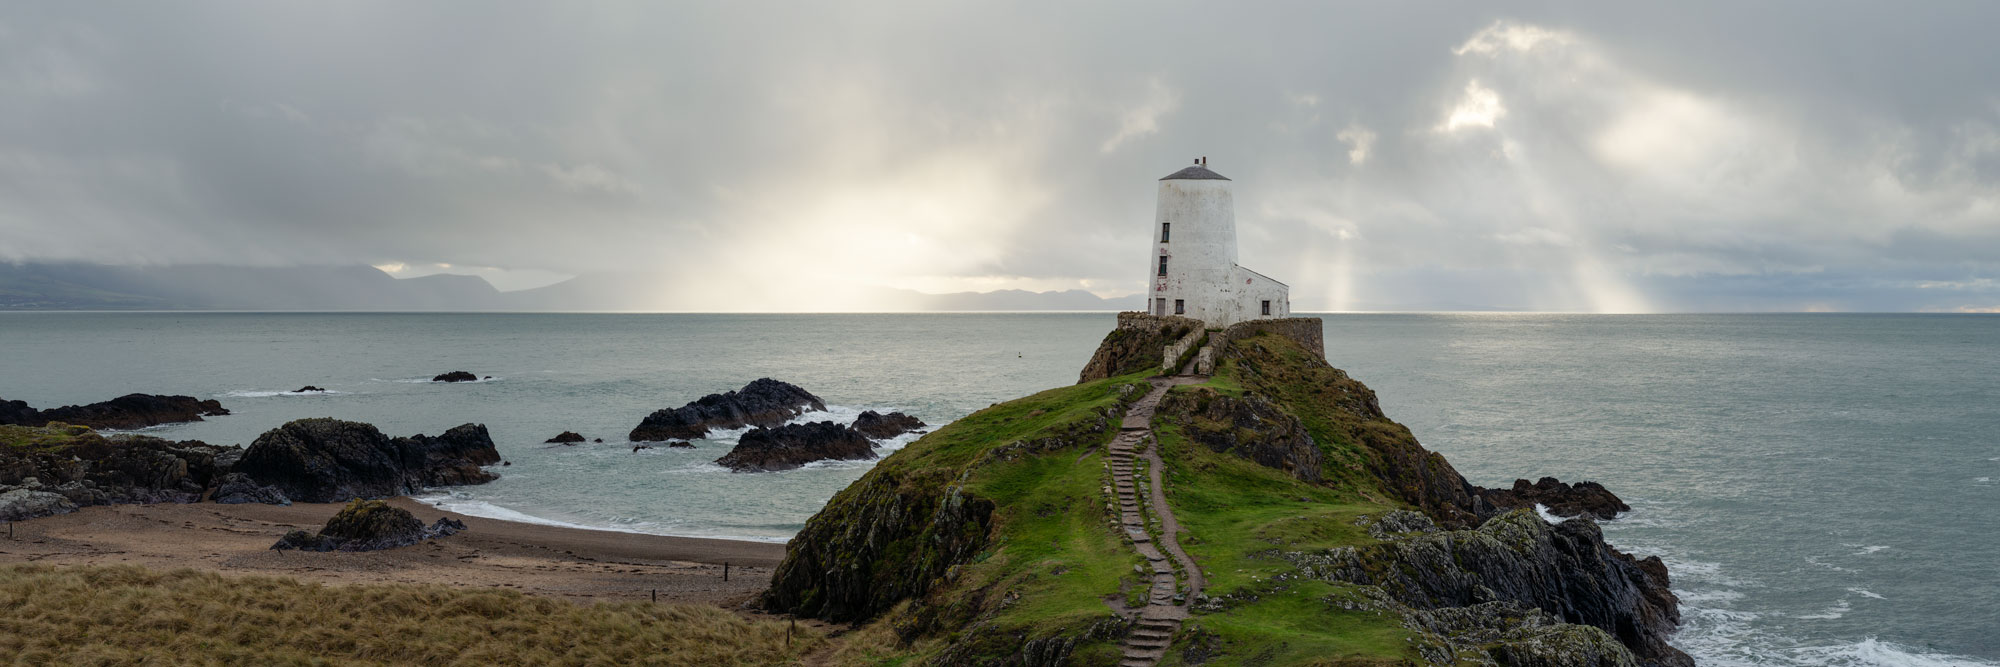 Panorama of a Anglesey Lighthouse on Ynys Llanddwyn Island in Wales